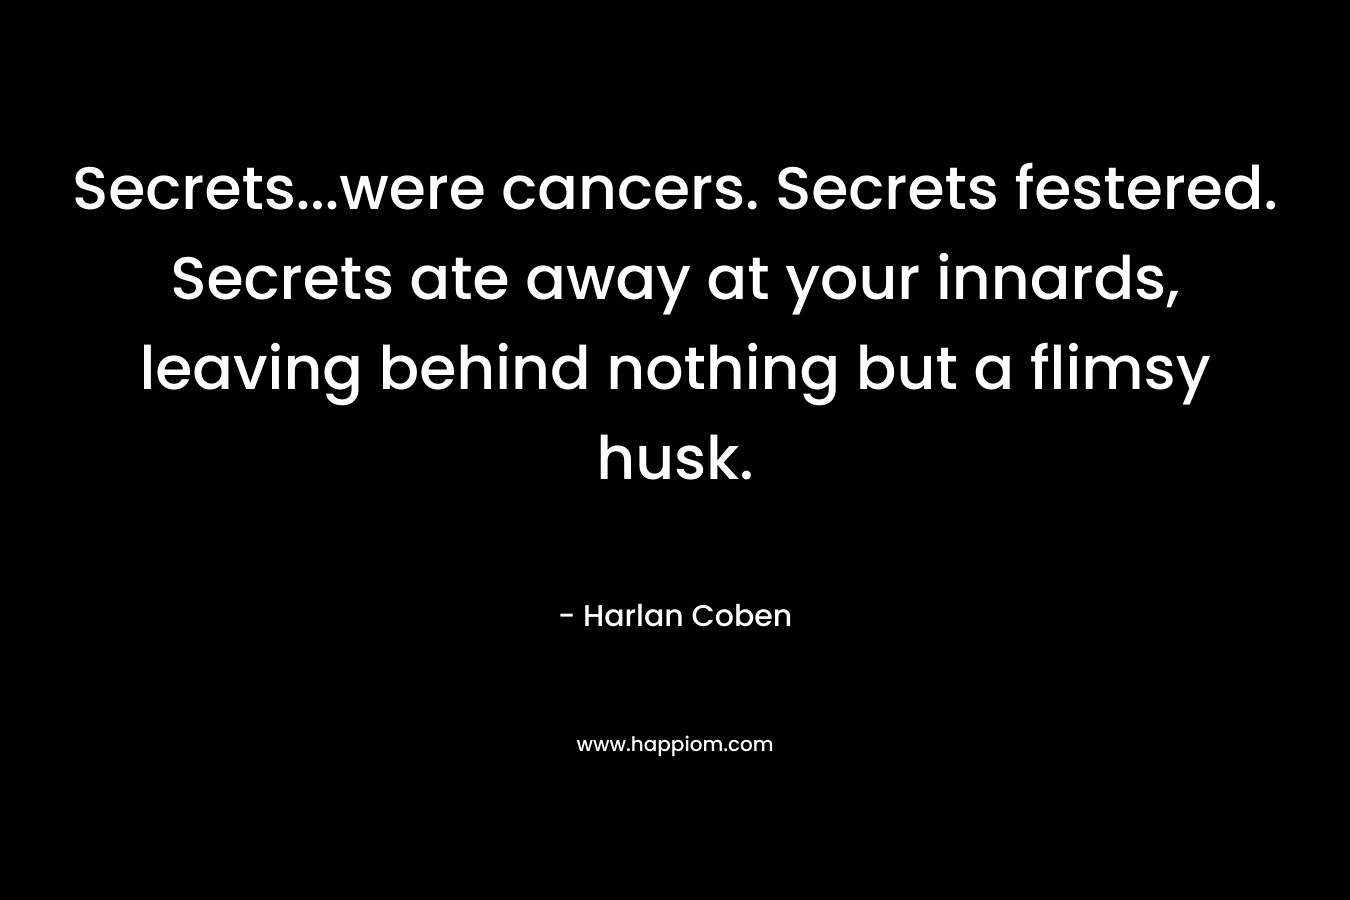 Secrets...were cancers. Secrets festered. Secrets ate away at your innards, leaving behind nothing but a flimsy husk.